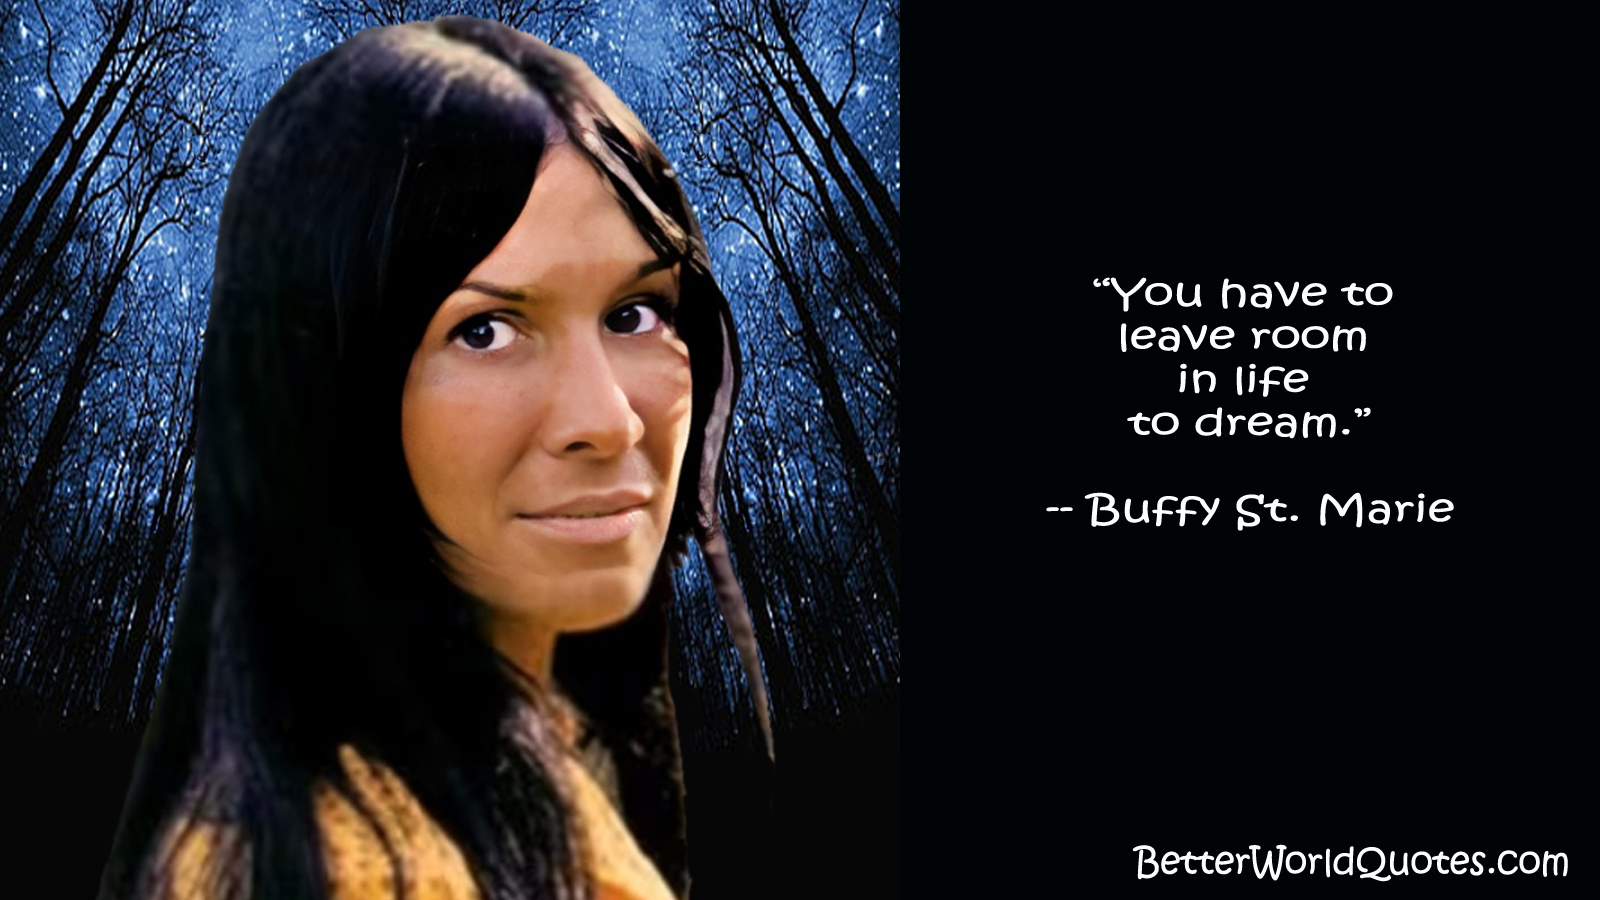 Buffy Sainte-Marie: You have to leave room in life to dream.